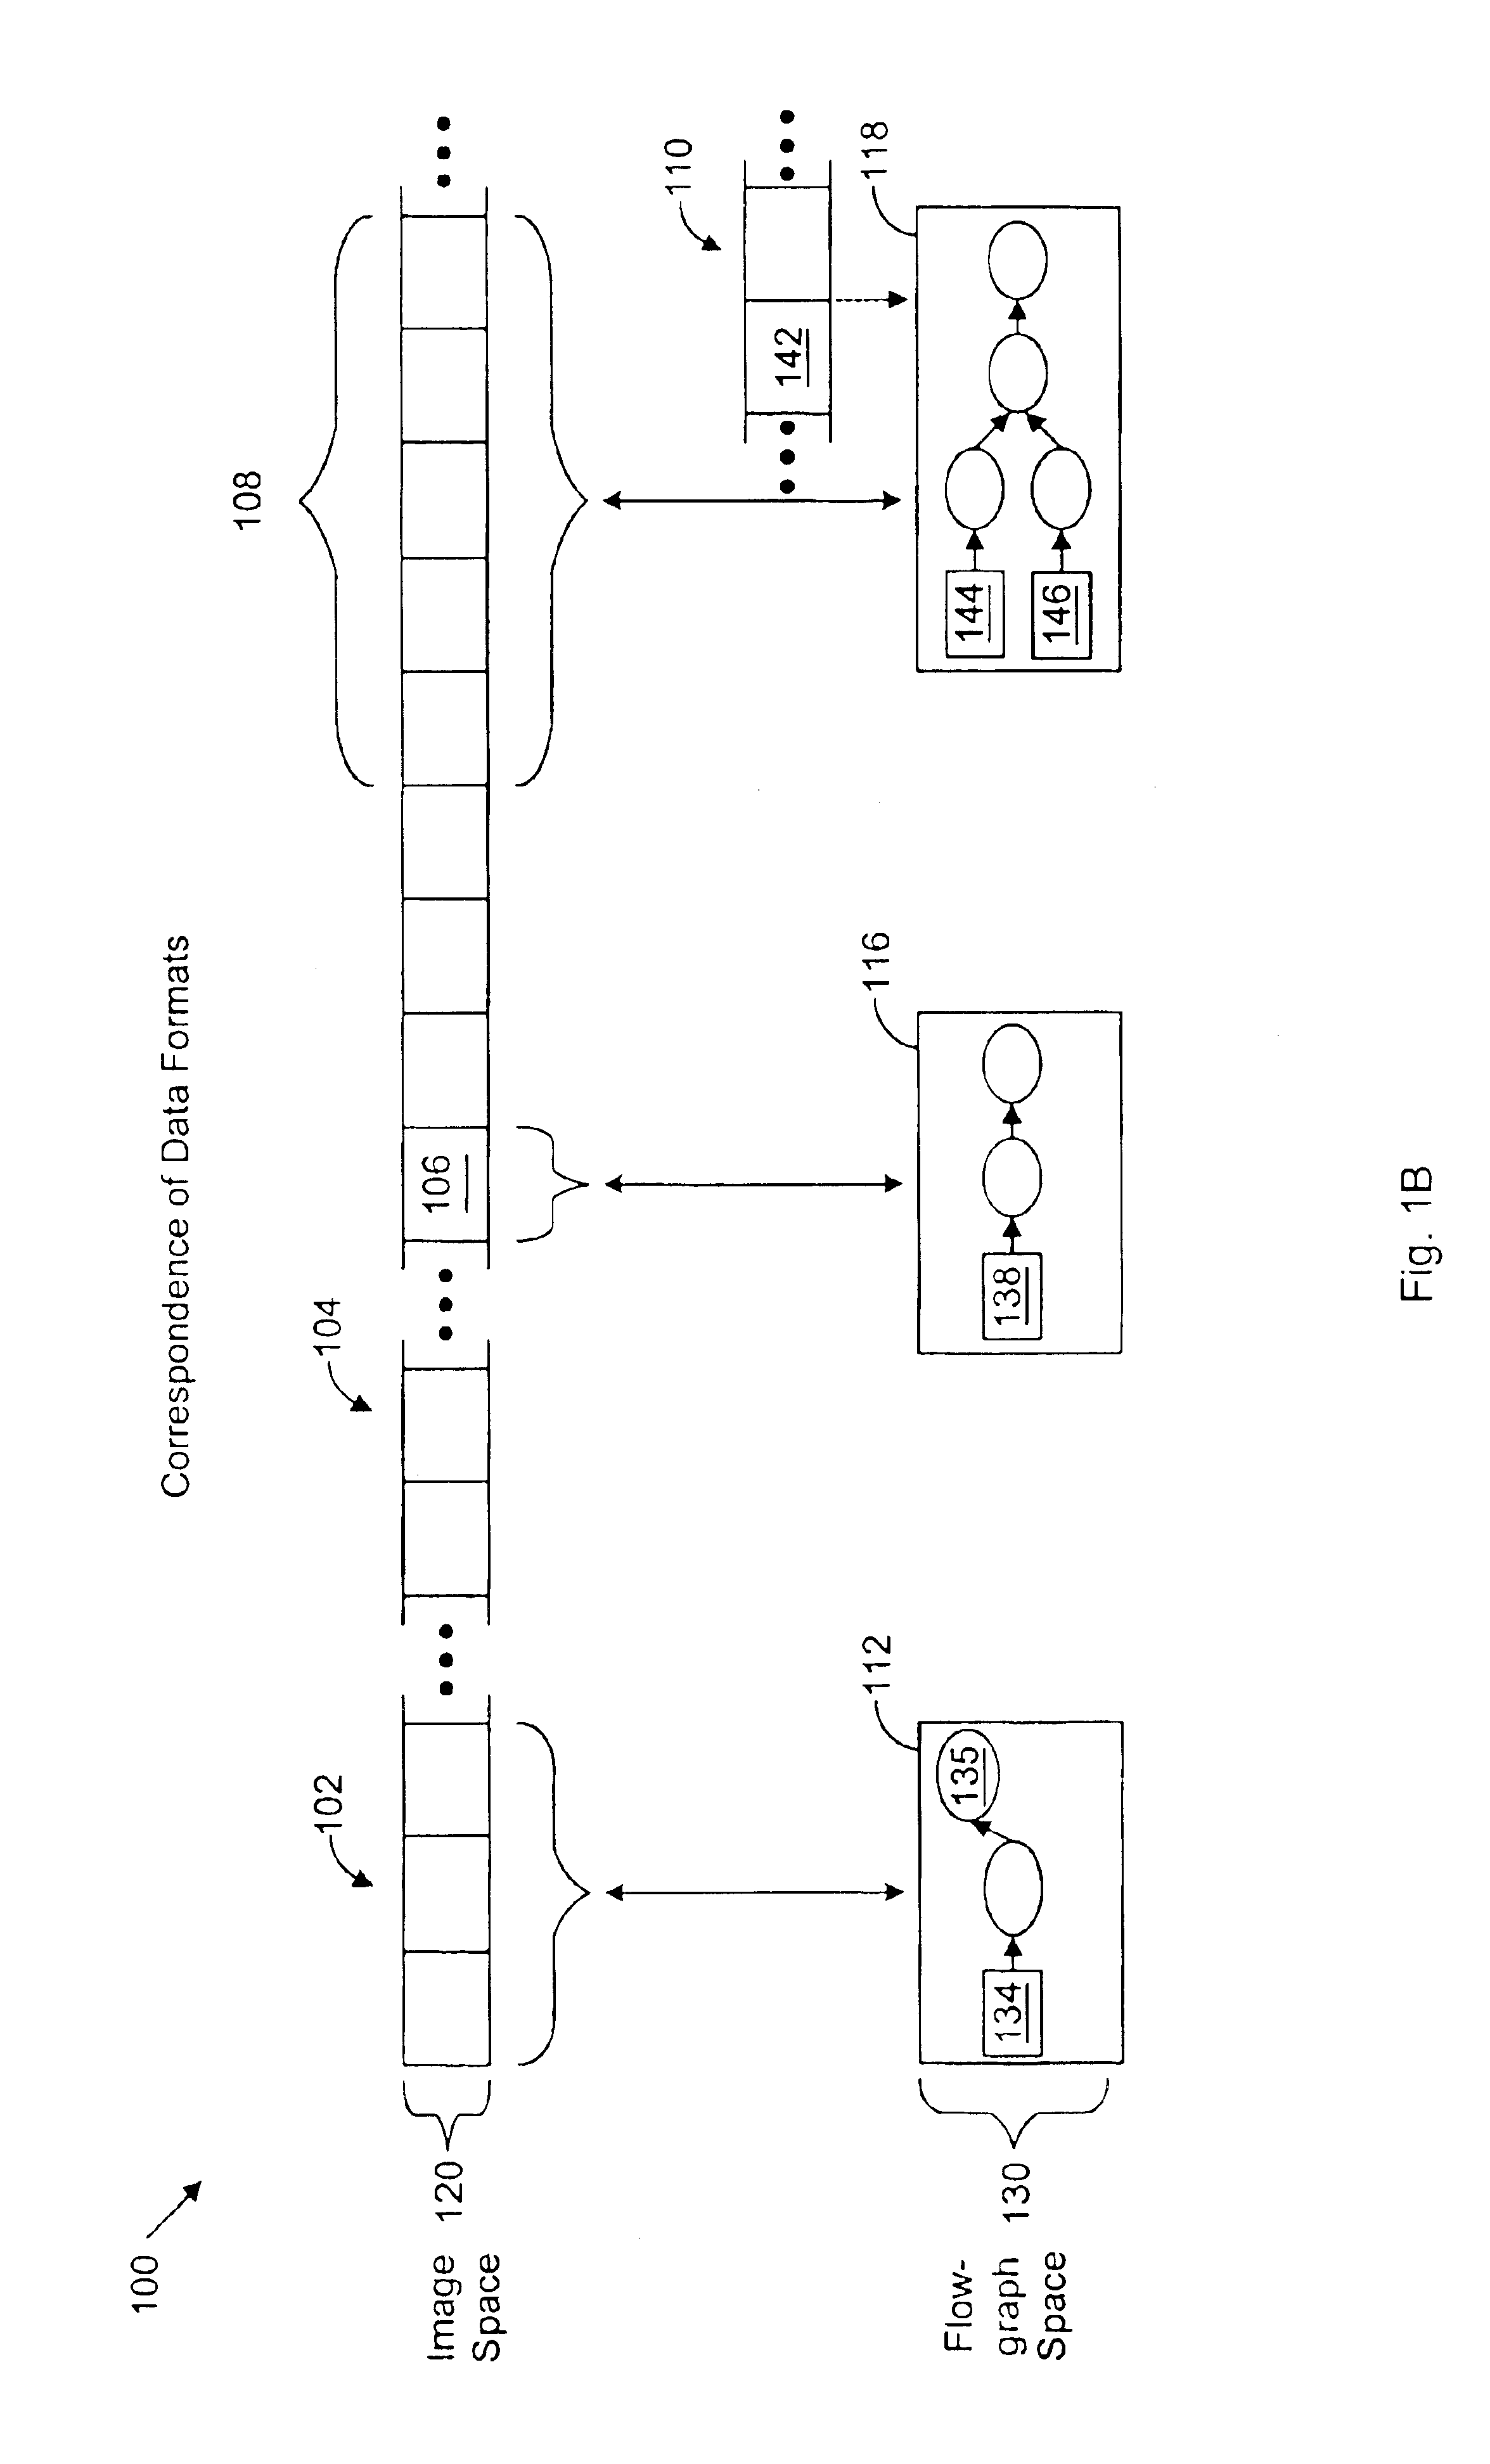 Media production system using flowgraph representation of operations